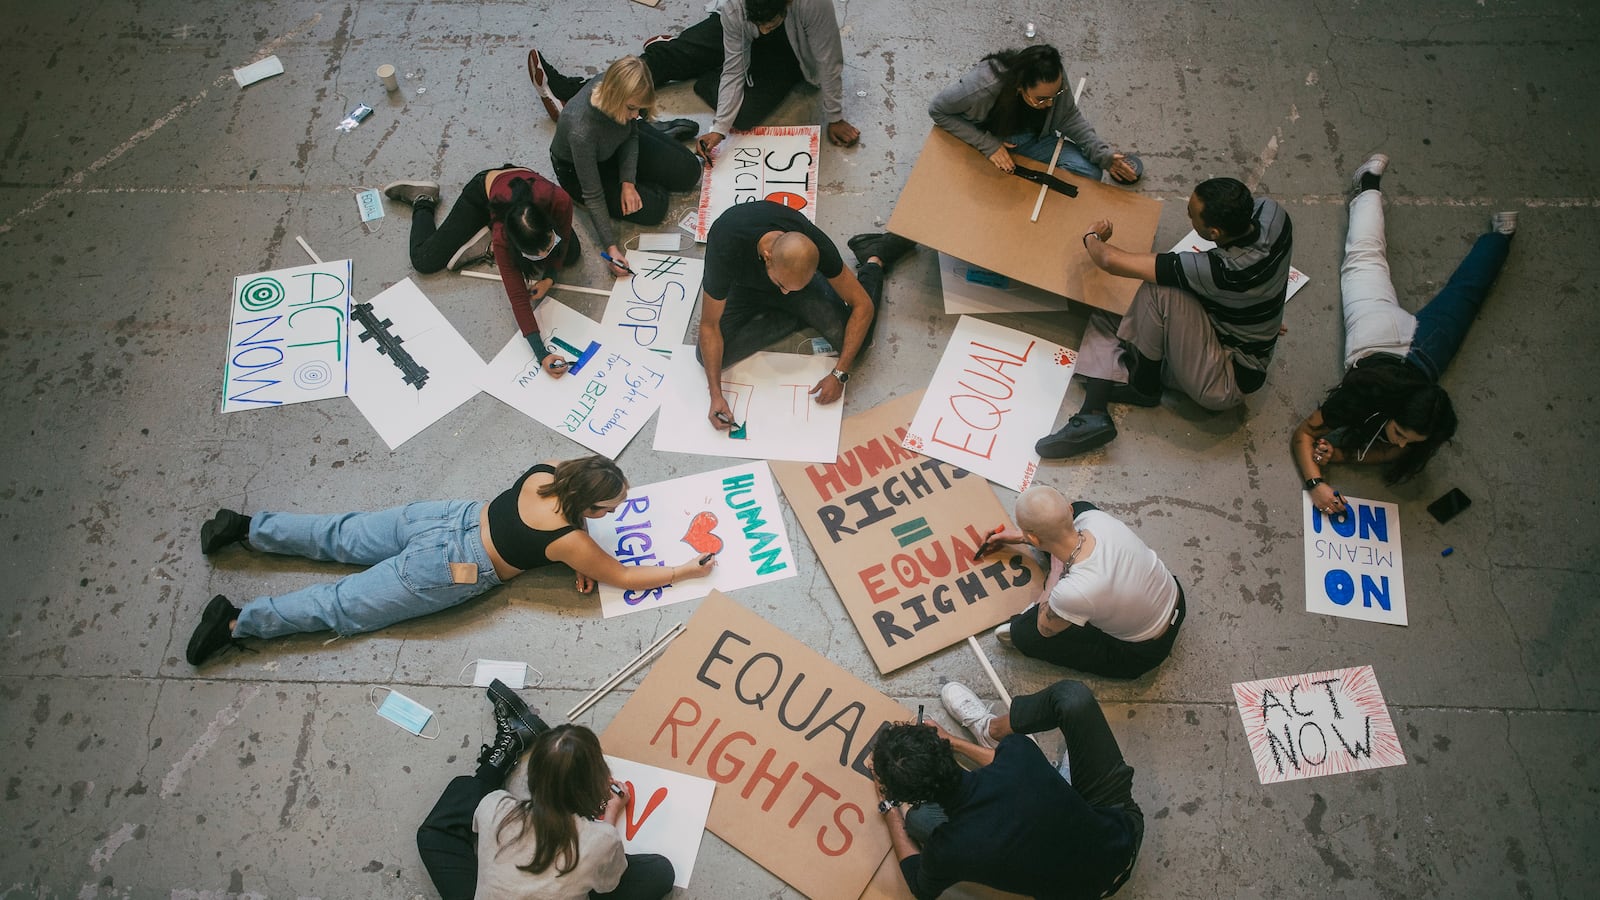 Young people make signs for equal rights and human rights.